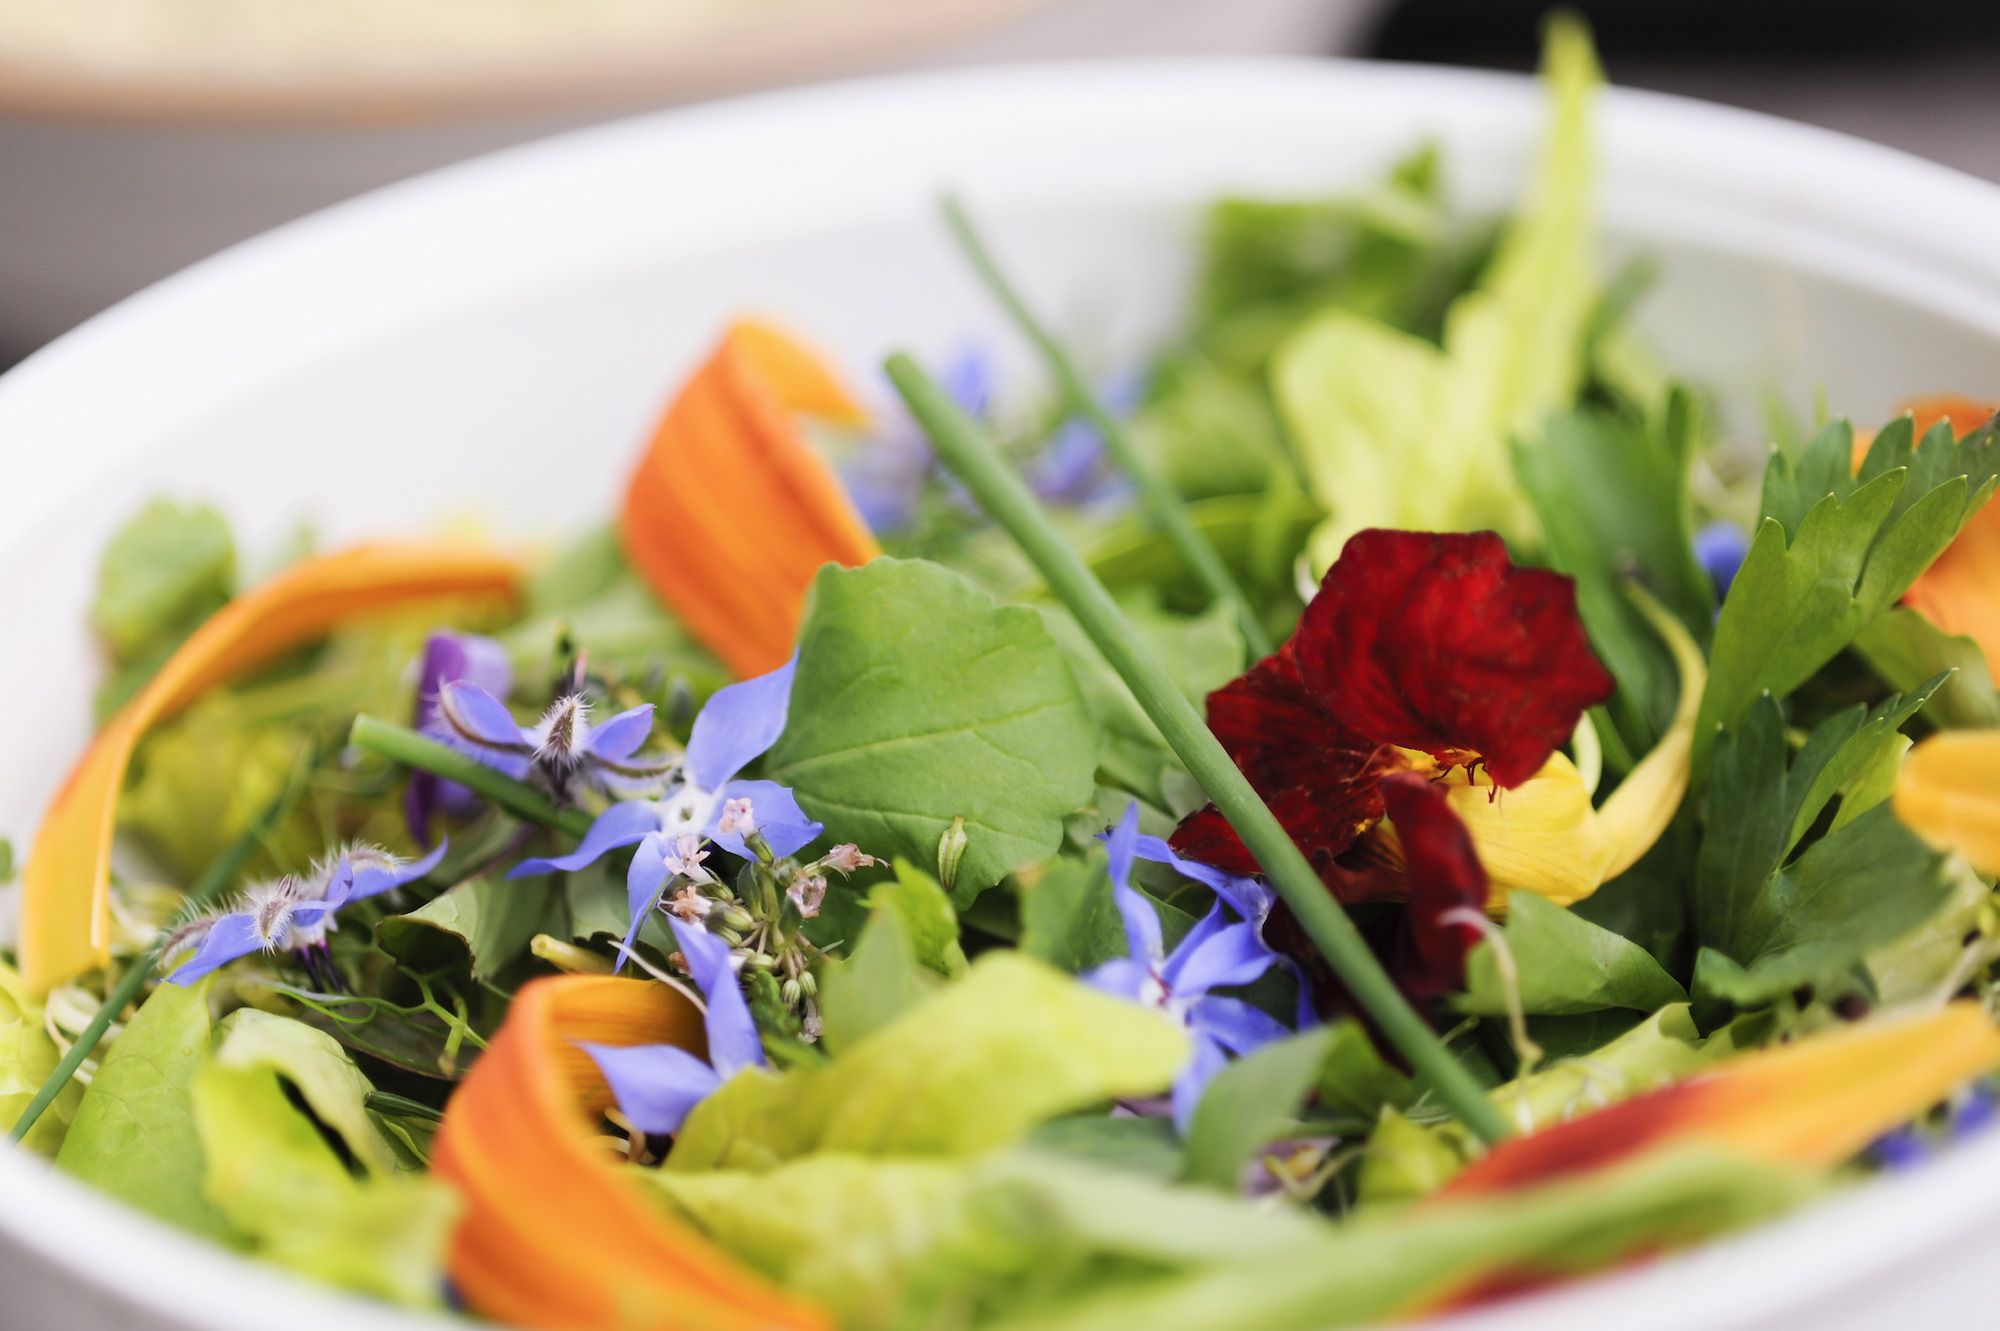 The 10 Best Edible Flowers To Decorate Your Food, According To A